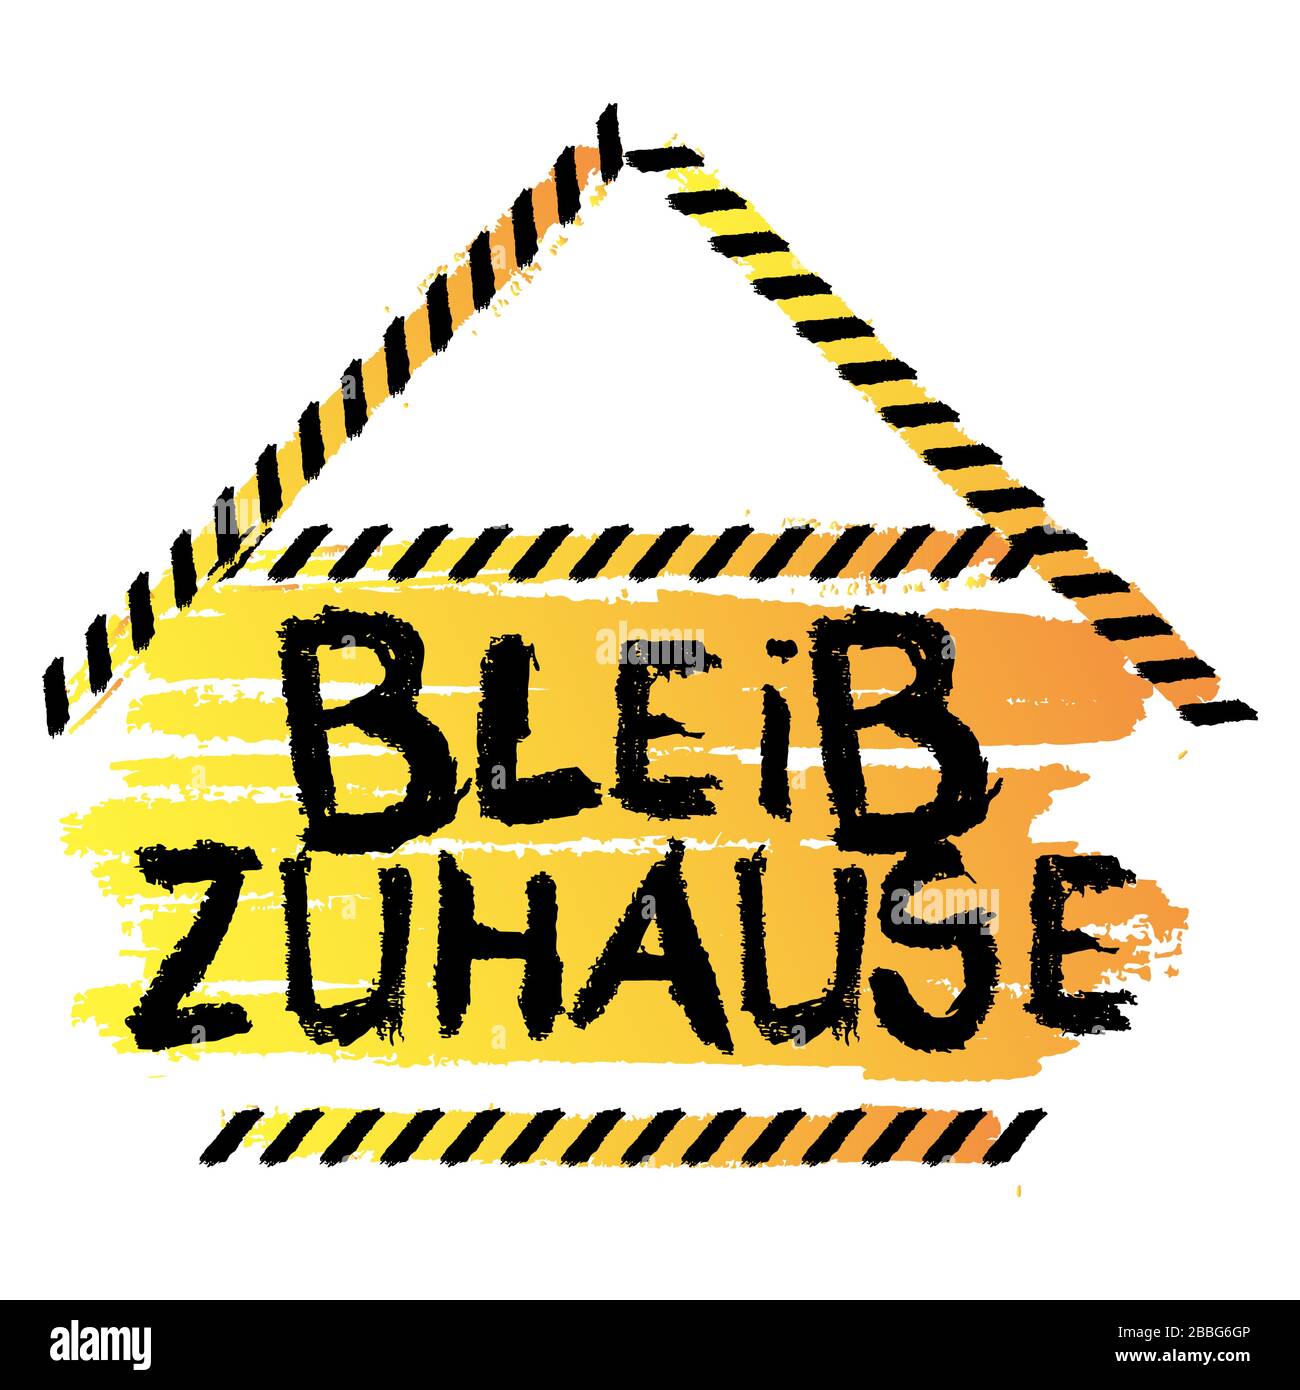 Bleib Zuhause, Stay at home in German text. Vector illustrated crayon drawing. Global message for the coronavirus crisis. Stock Vector